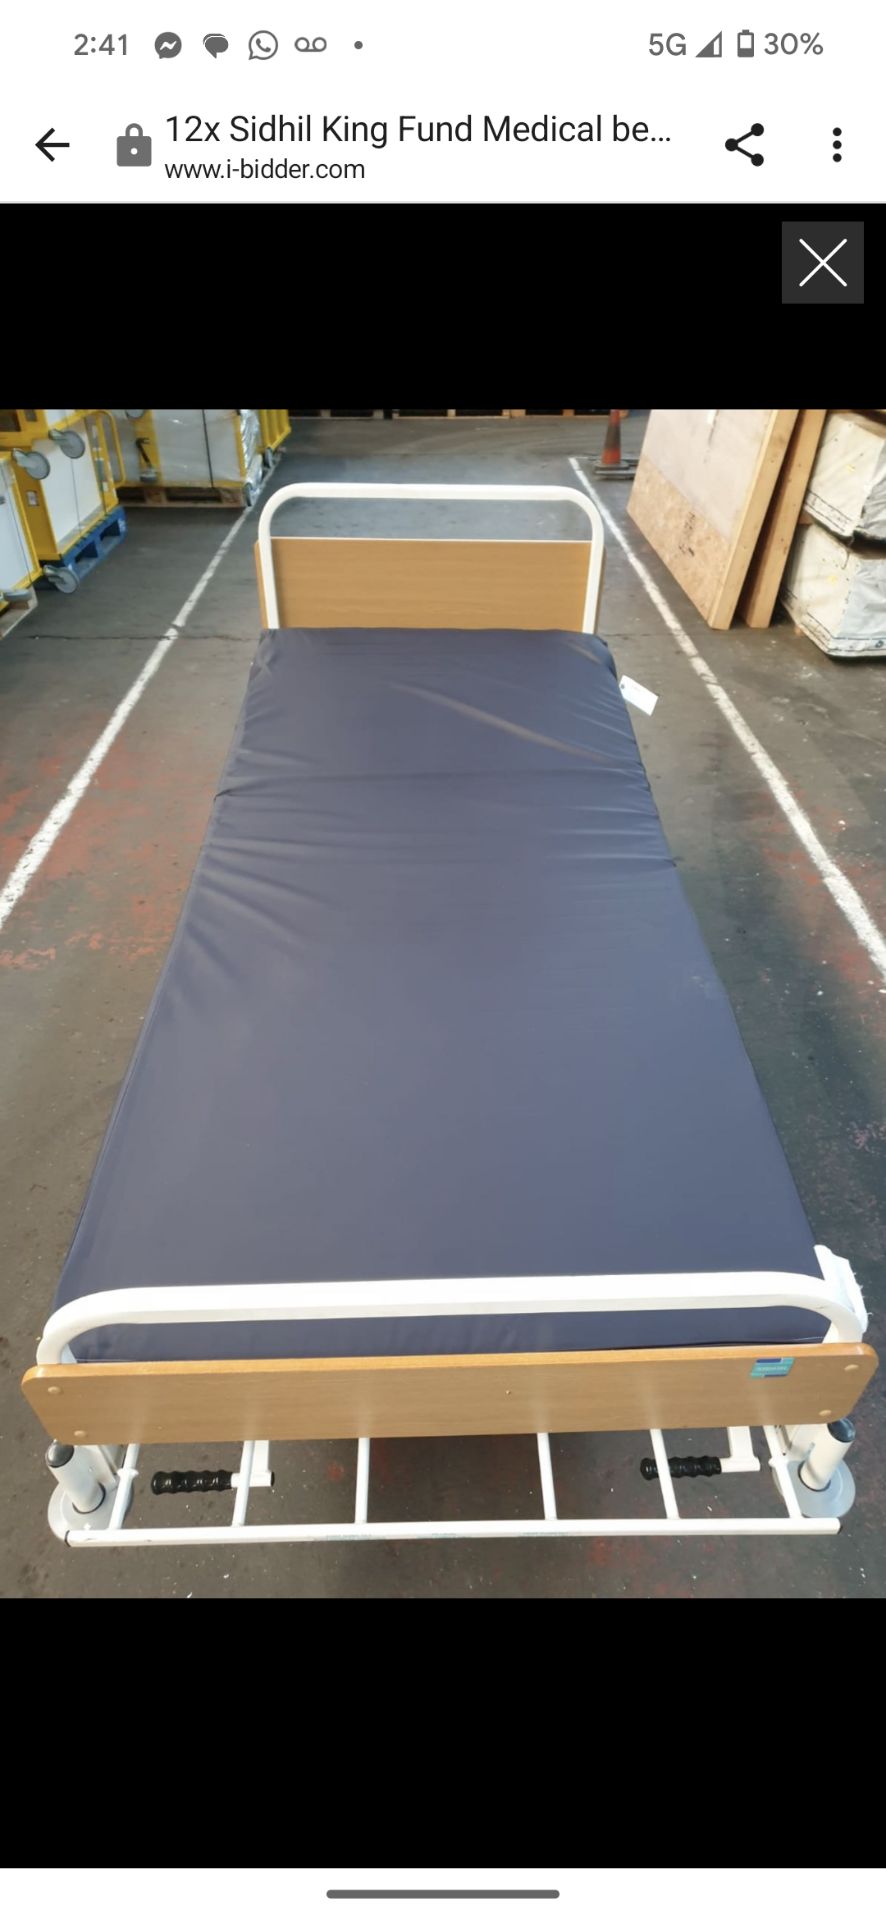 SIDHL 2 WAY TILT, HYDRAULIC LIFT HOSPITAL BED WITH MATTRESS RRP £1685 (NO VAT ON HAMMER) - Image 5 of 7